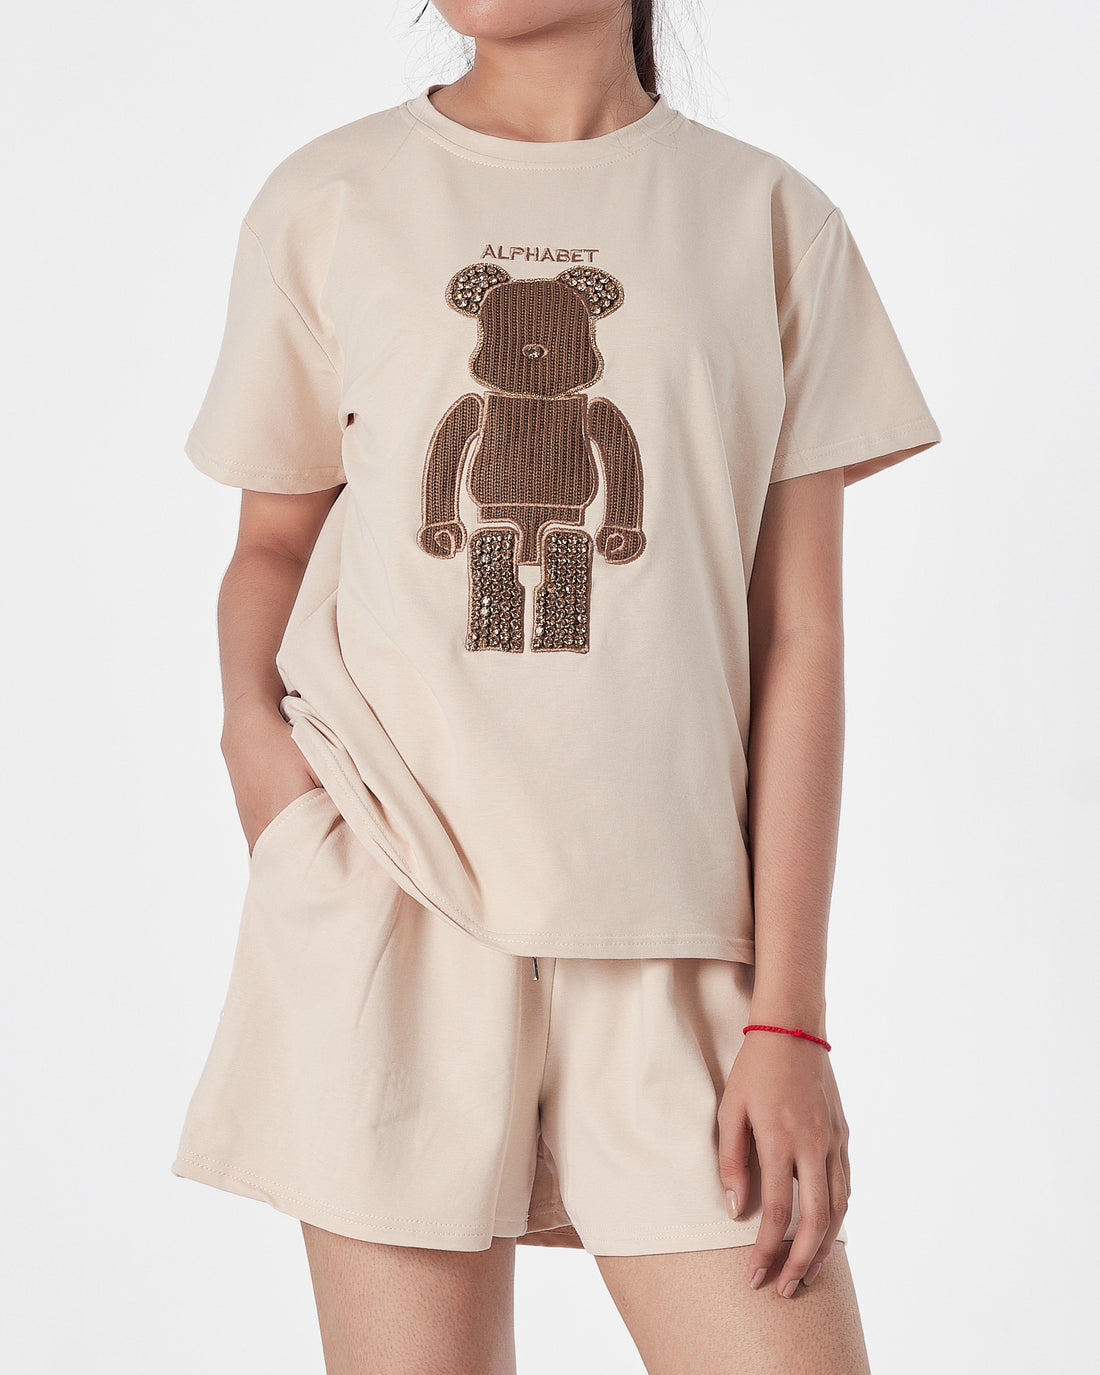 Bear Lady Cream T-Shirt + Shorts 2 Piece Outfit 24.90